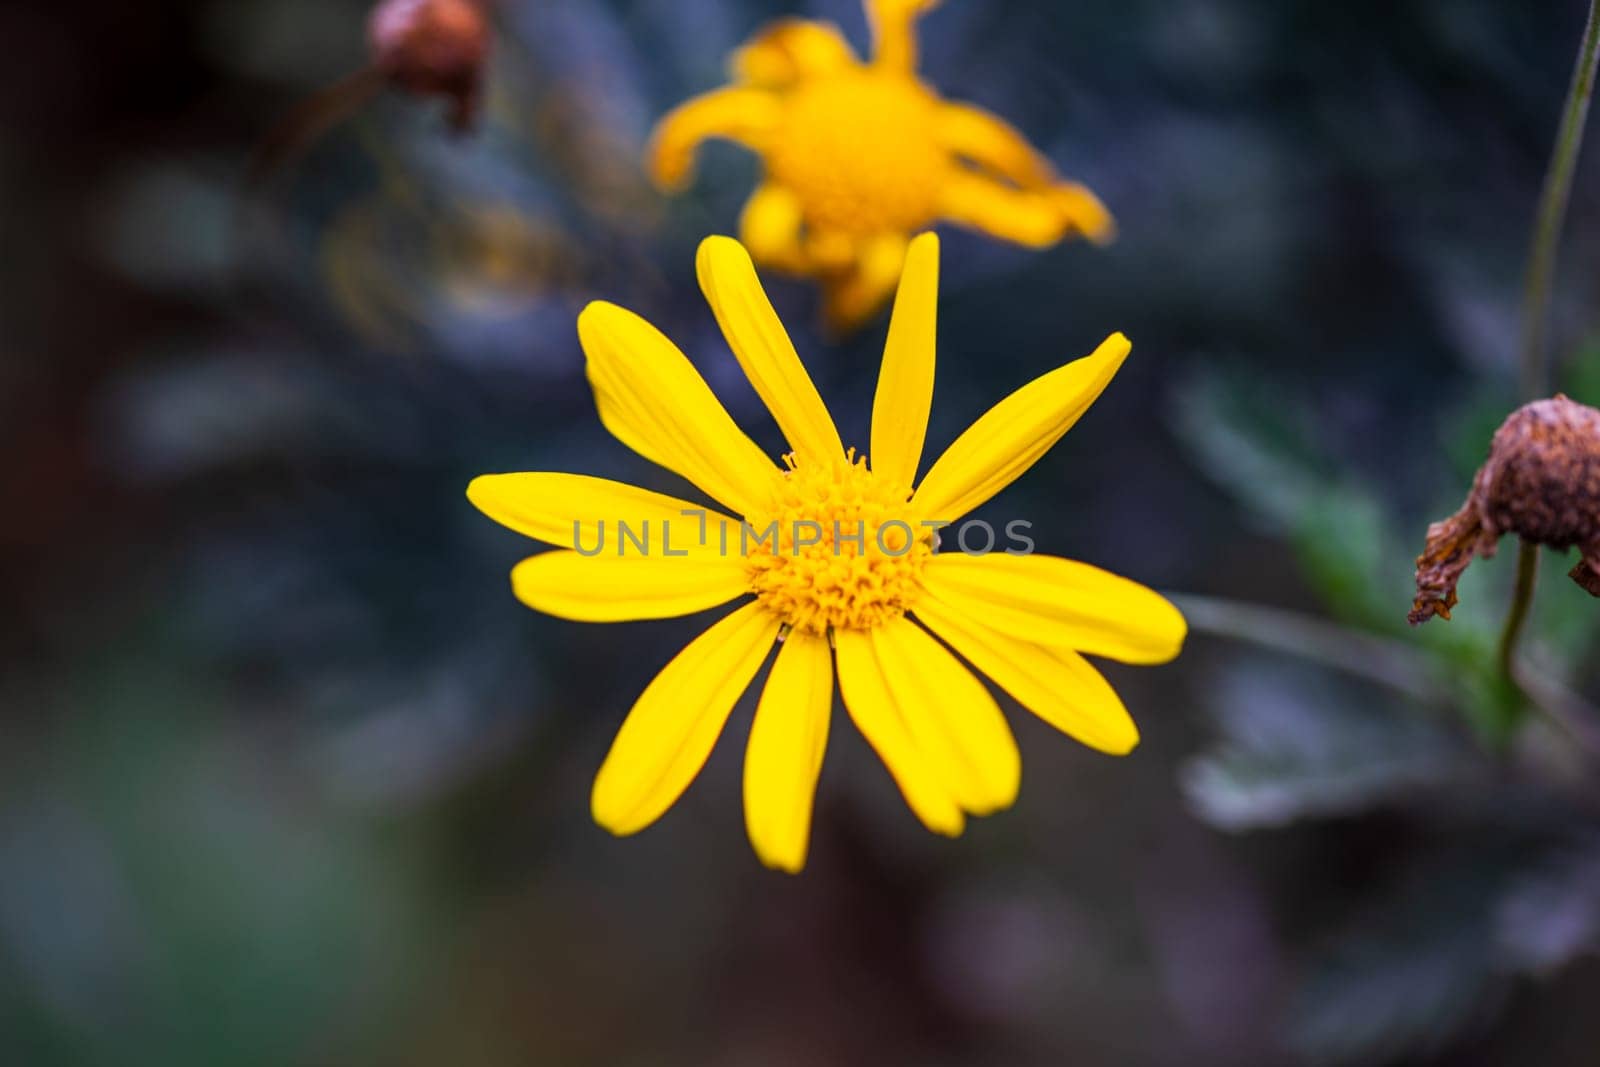 Yellow little flower against blurred background